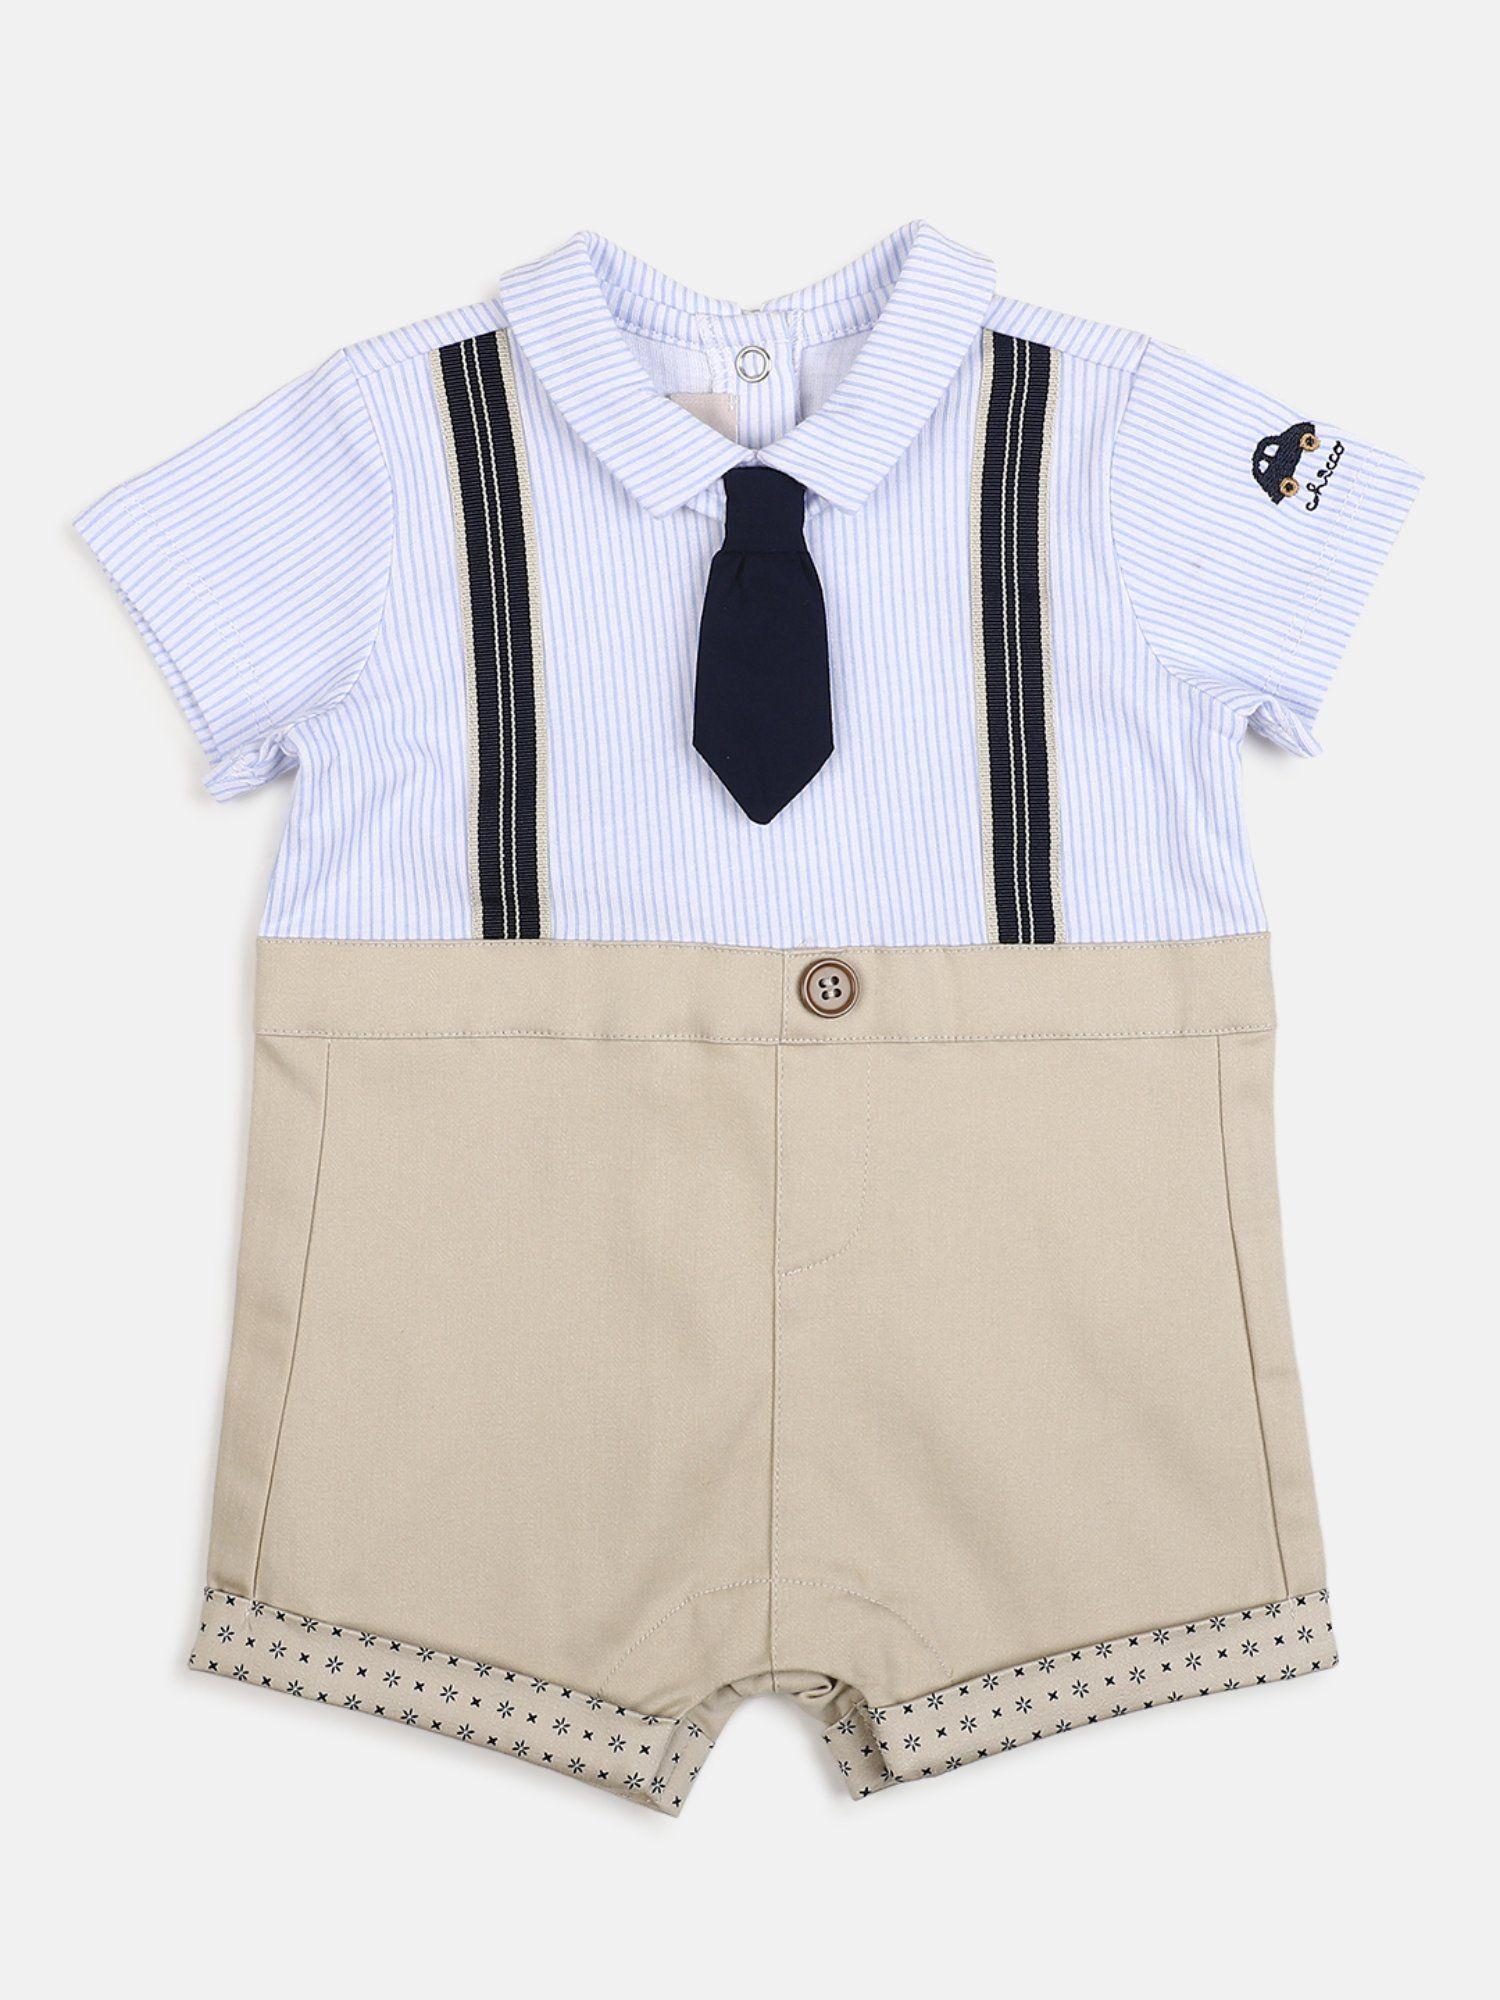 boys multi-color striped short sleeve bodysuit with tie (set of 2)